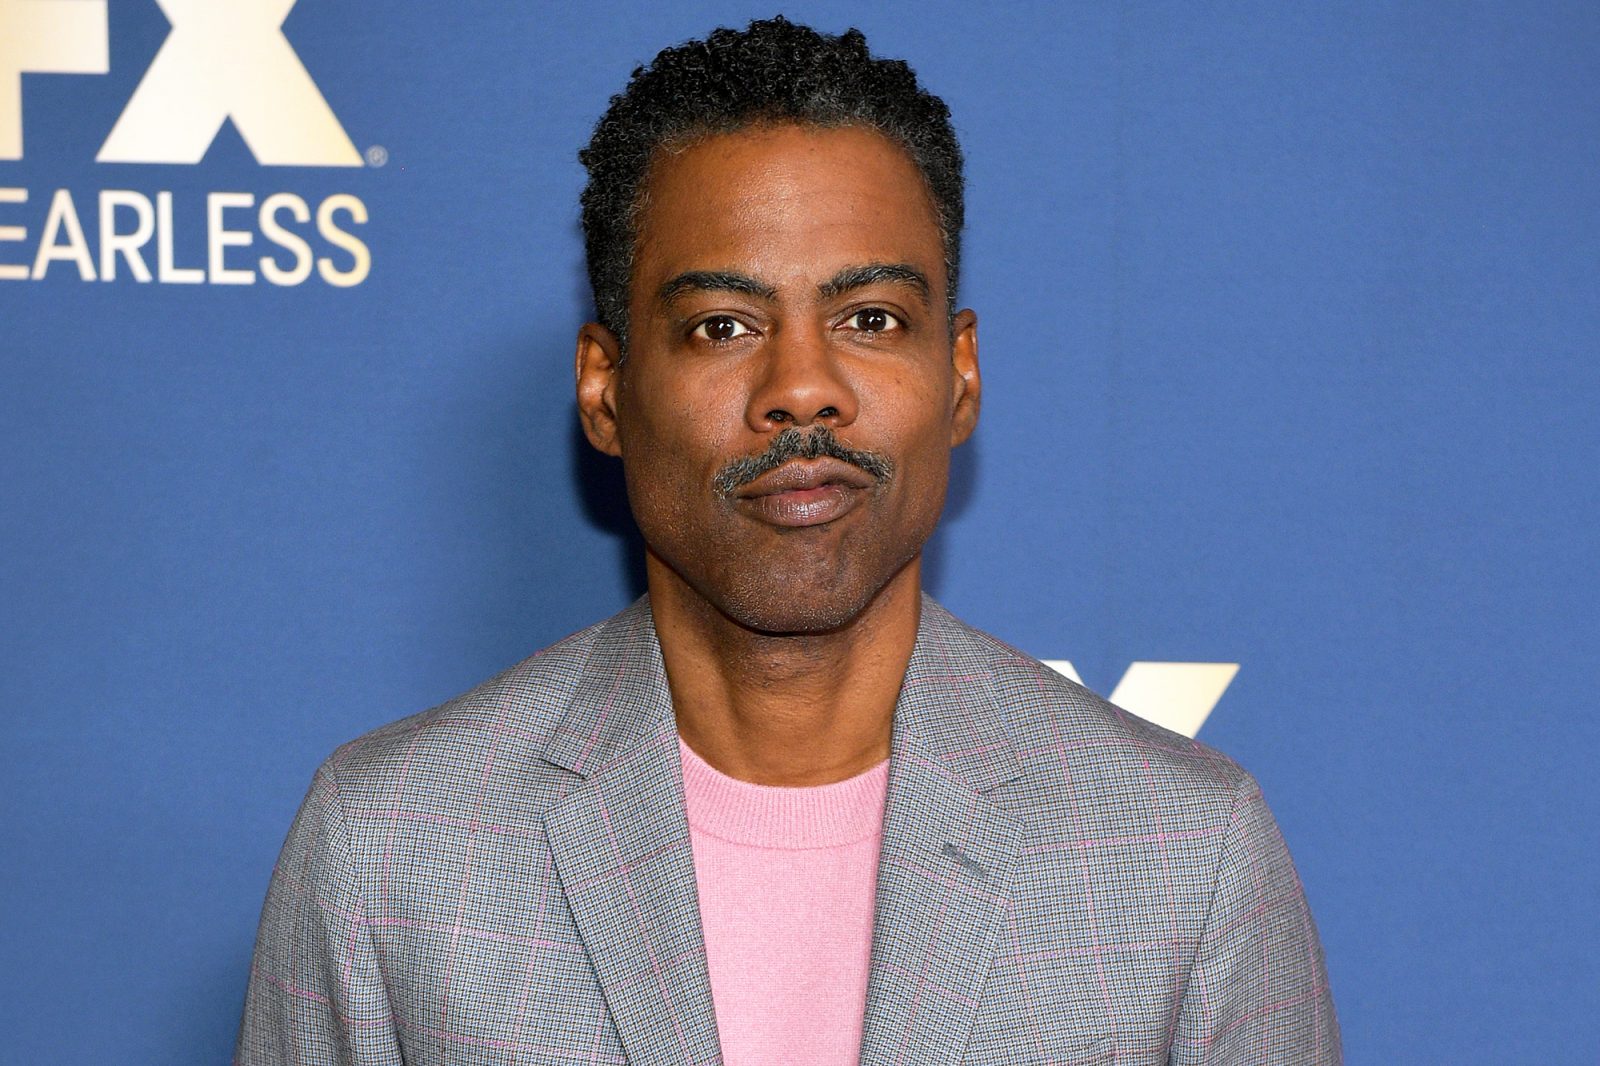 When Will You Meet Your Soulmate? ❤️ Rate a Bunch of Male Celebrities to Find Out Chris Rock